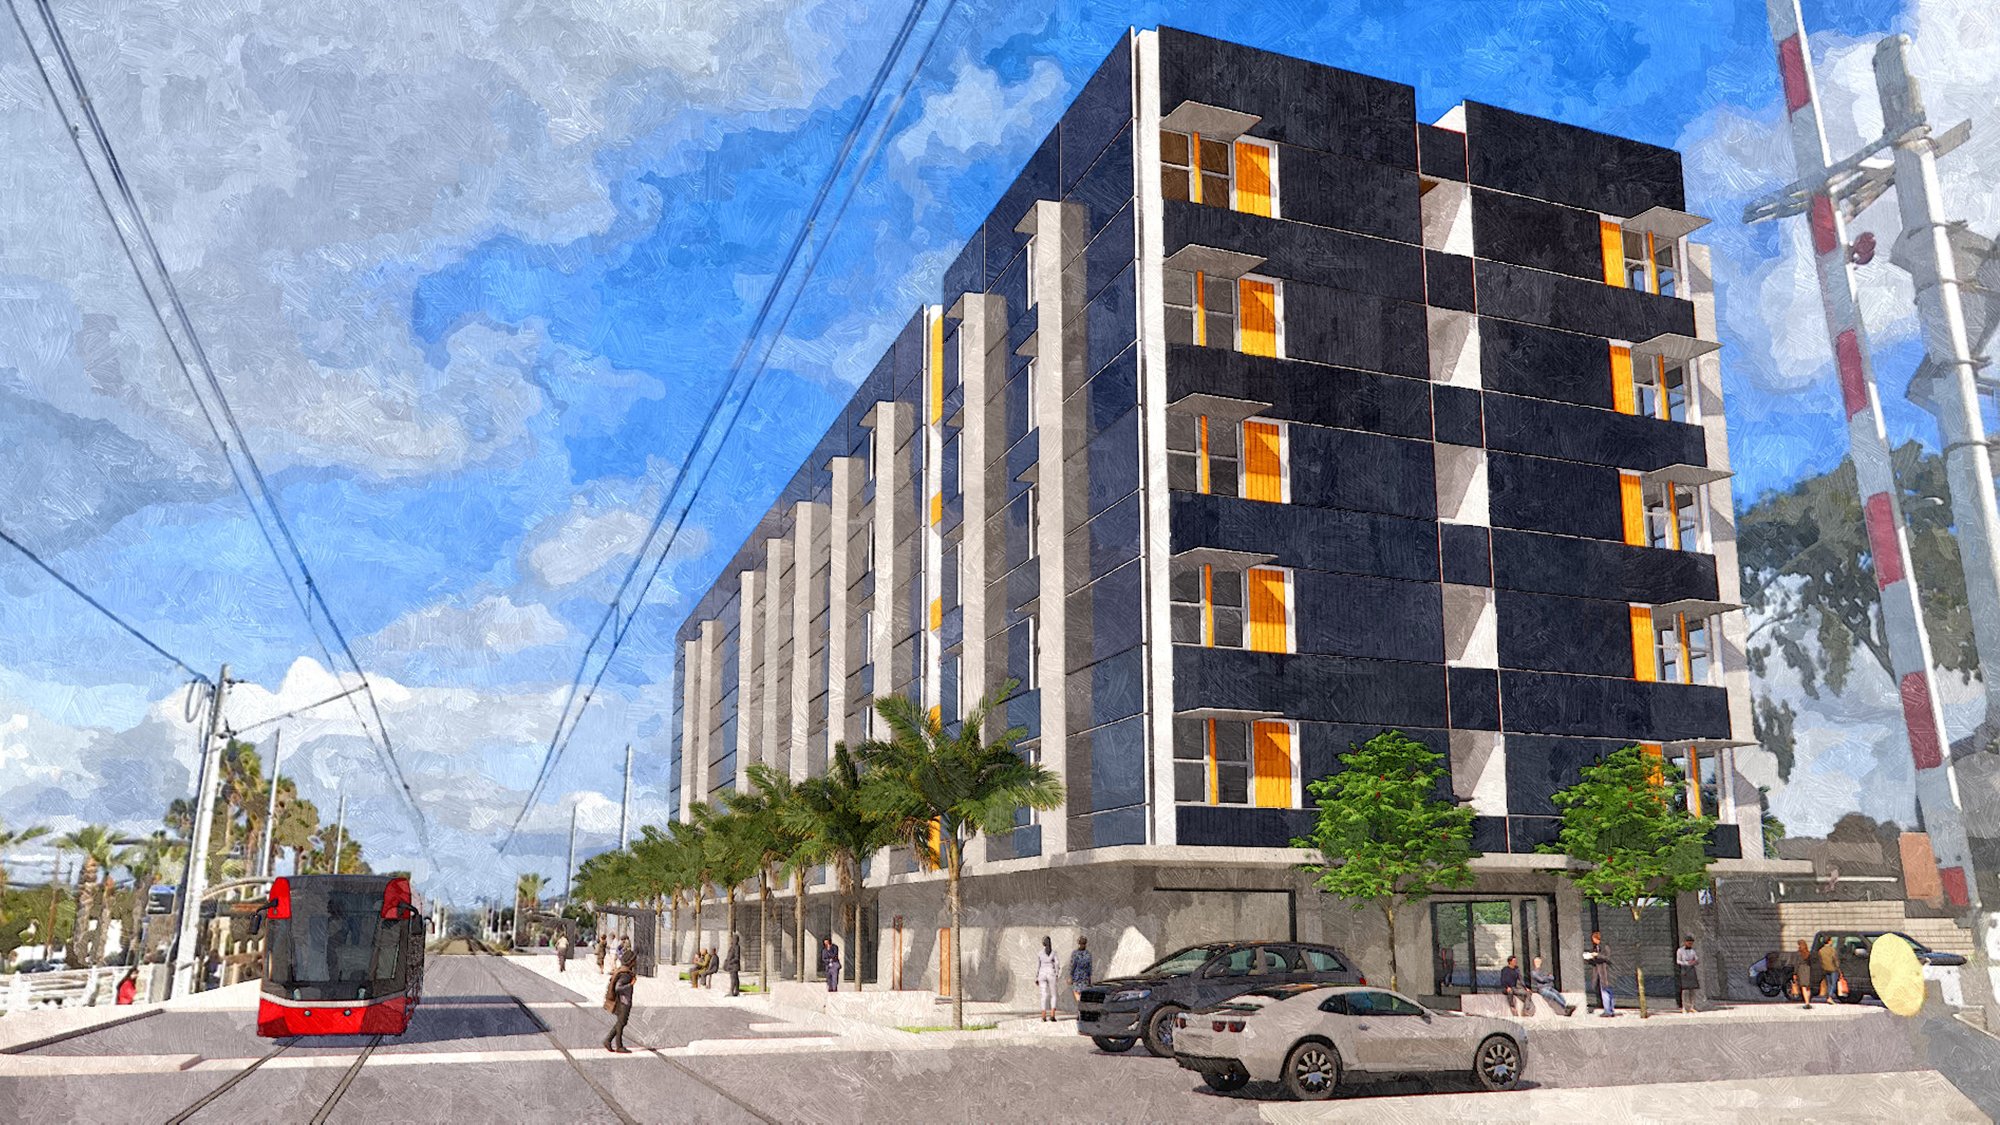 A rendering of a modern housing complex next to a public transit facility